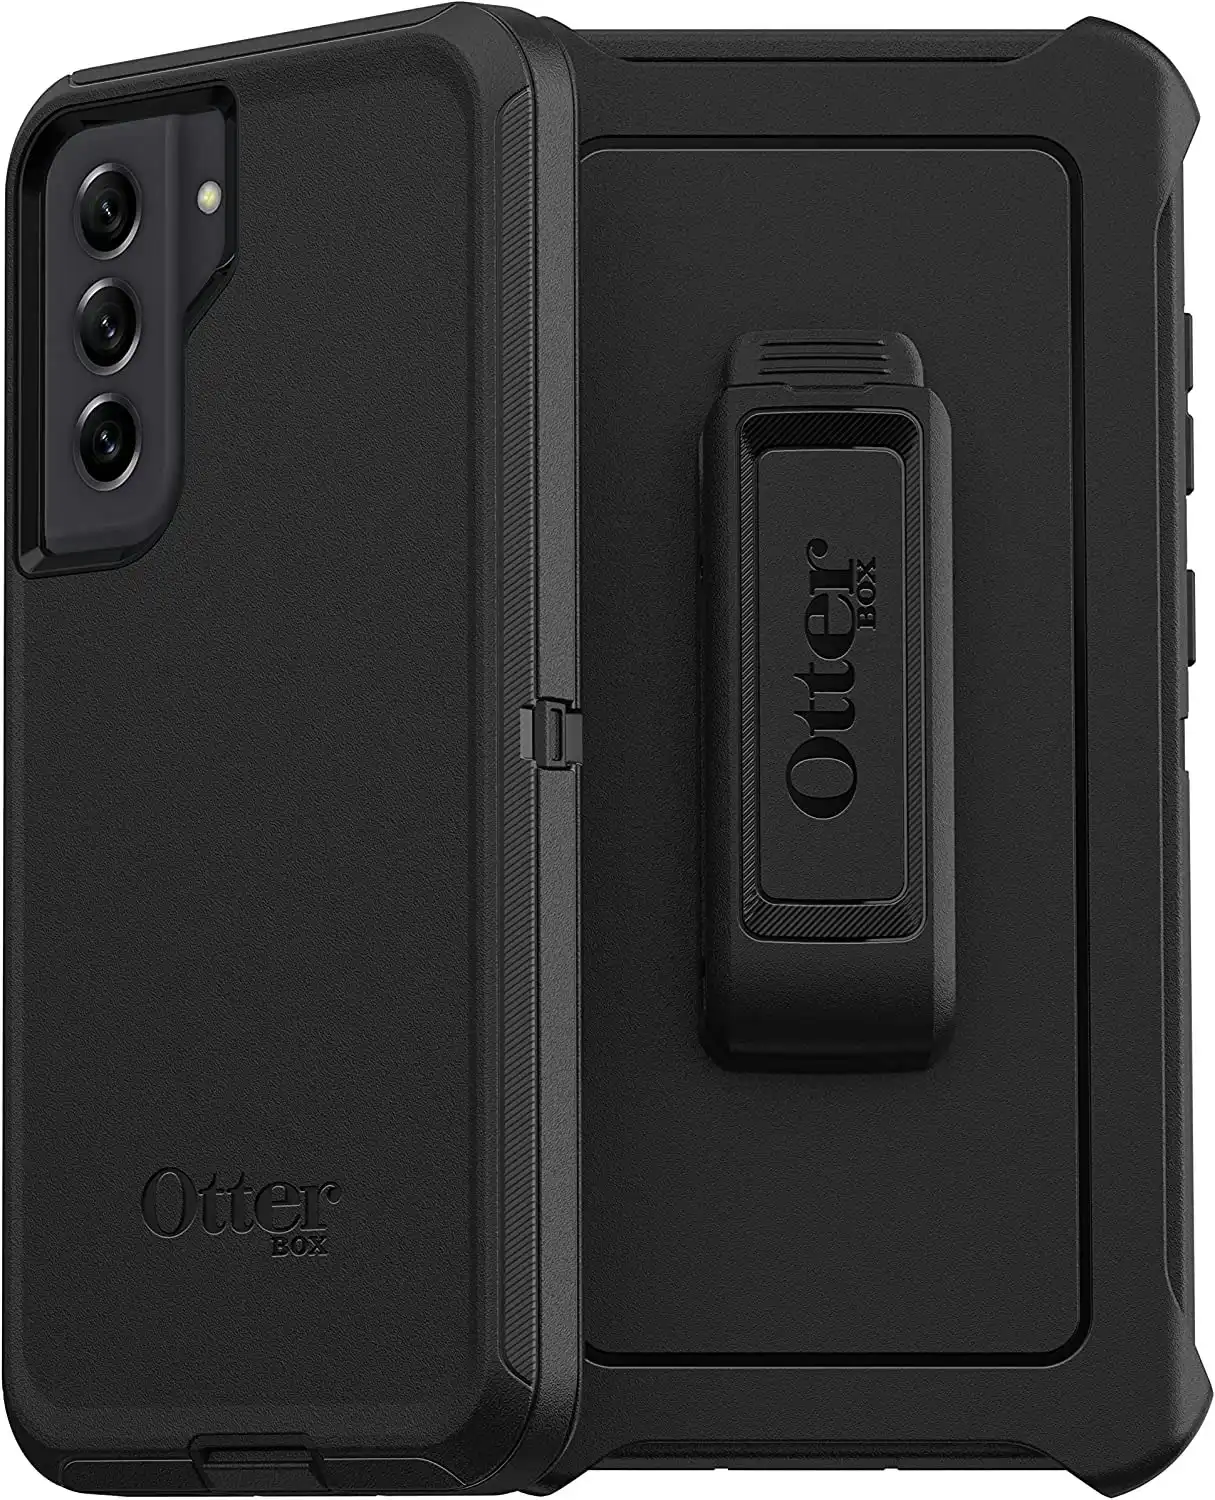 Otterbox Defender Series Case For Samsung Galaxy S21 Fe 5g - Black